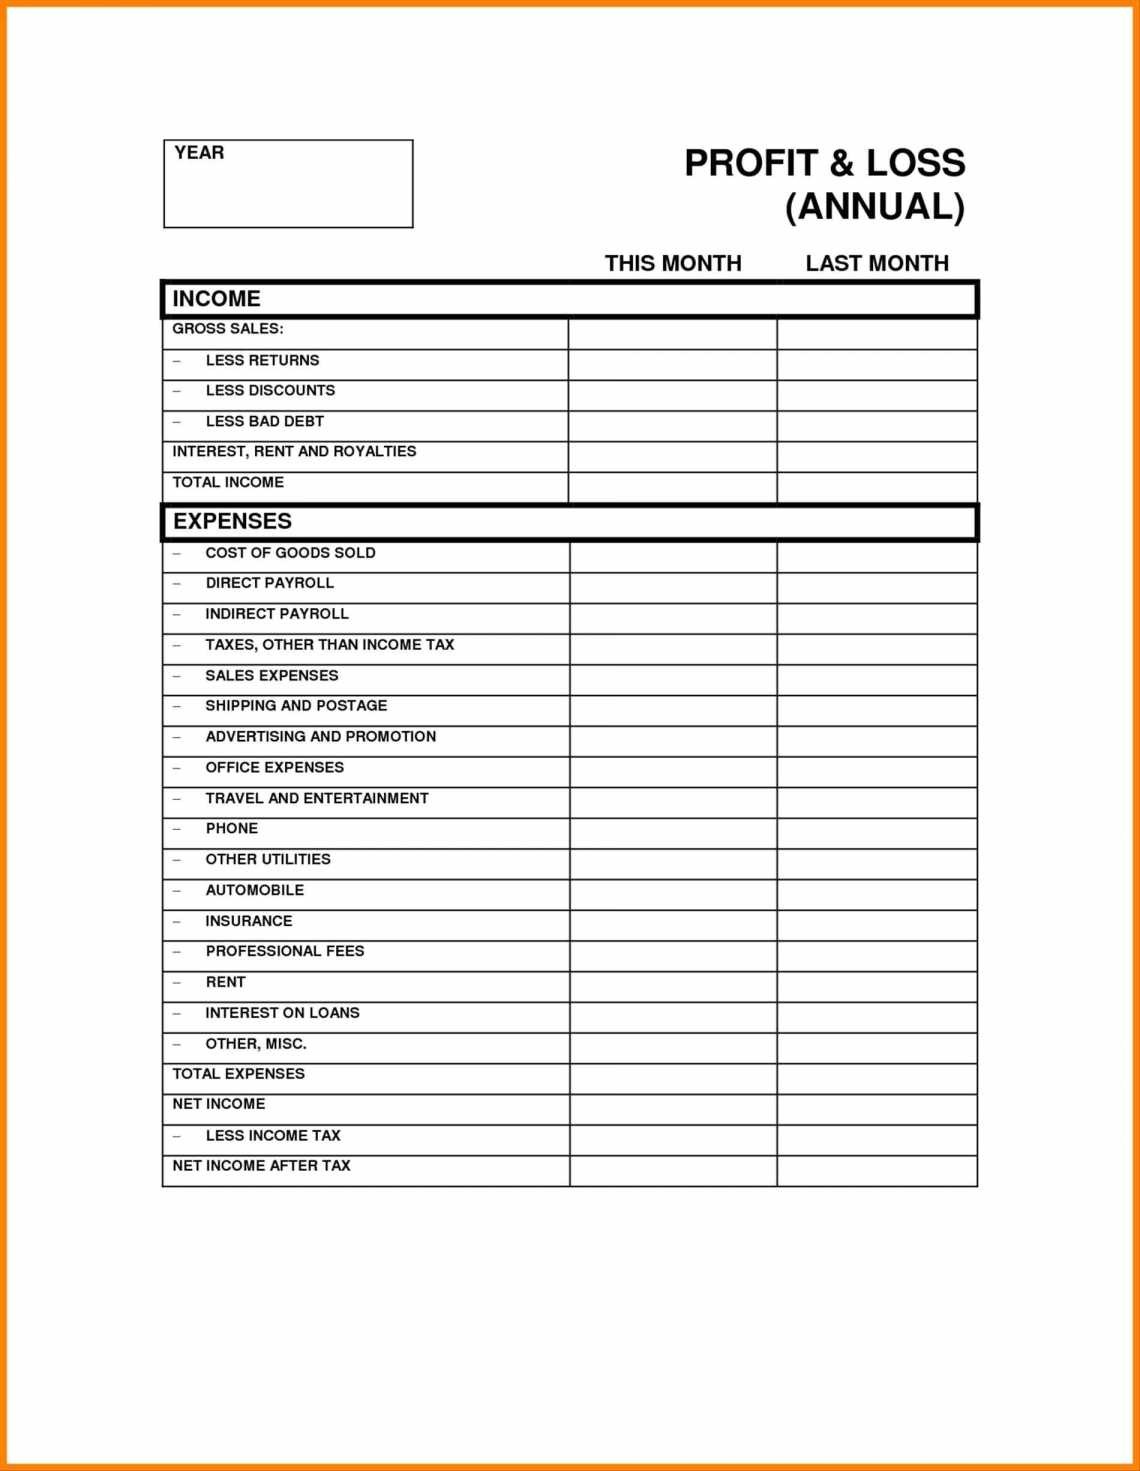 Examples Of Profit And Loss Statement Template For Self Employed Excel Throughout Profit And Loss Statement Template For Self Employed Excel For Google Sheet